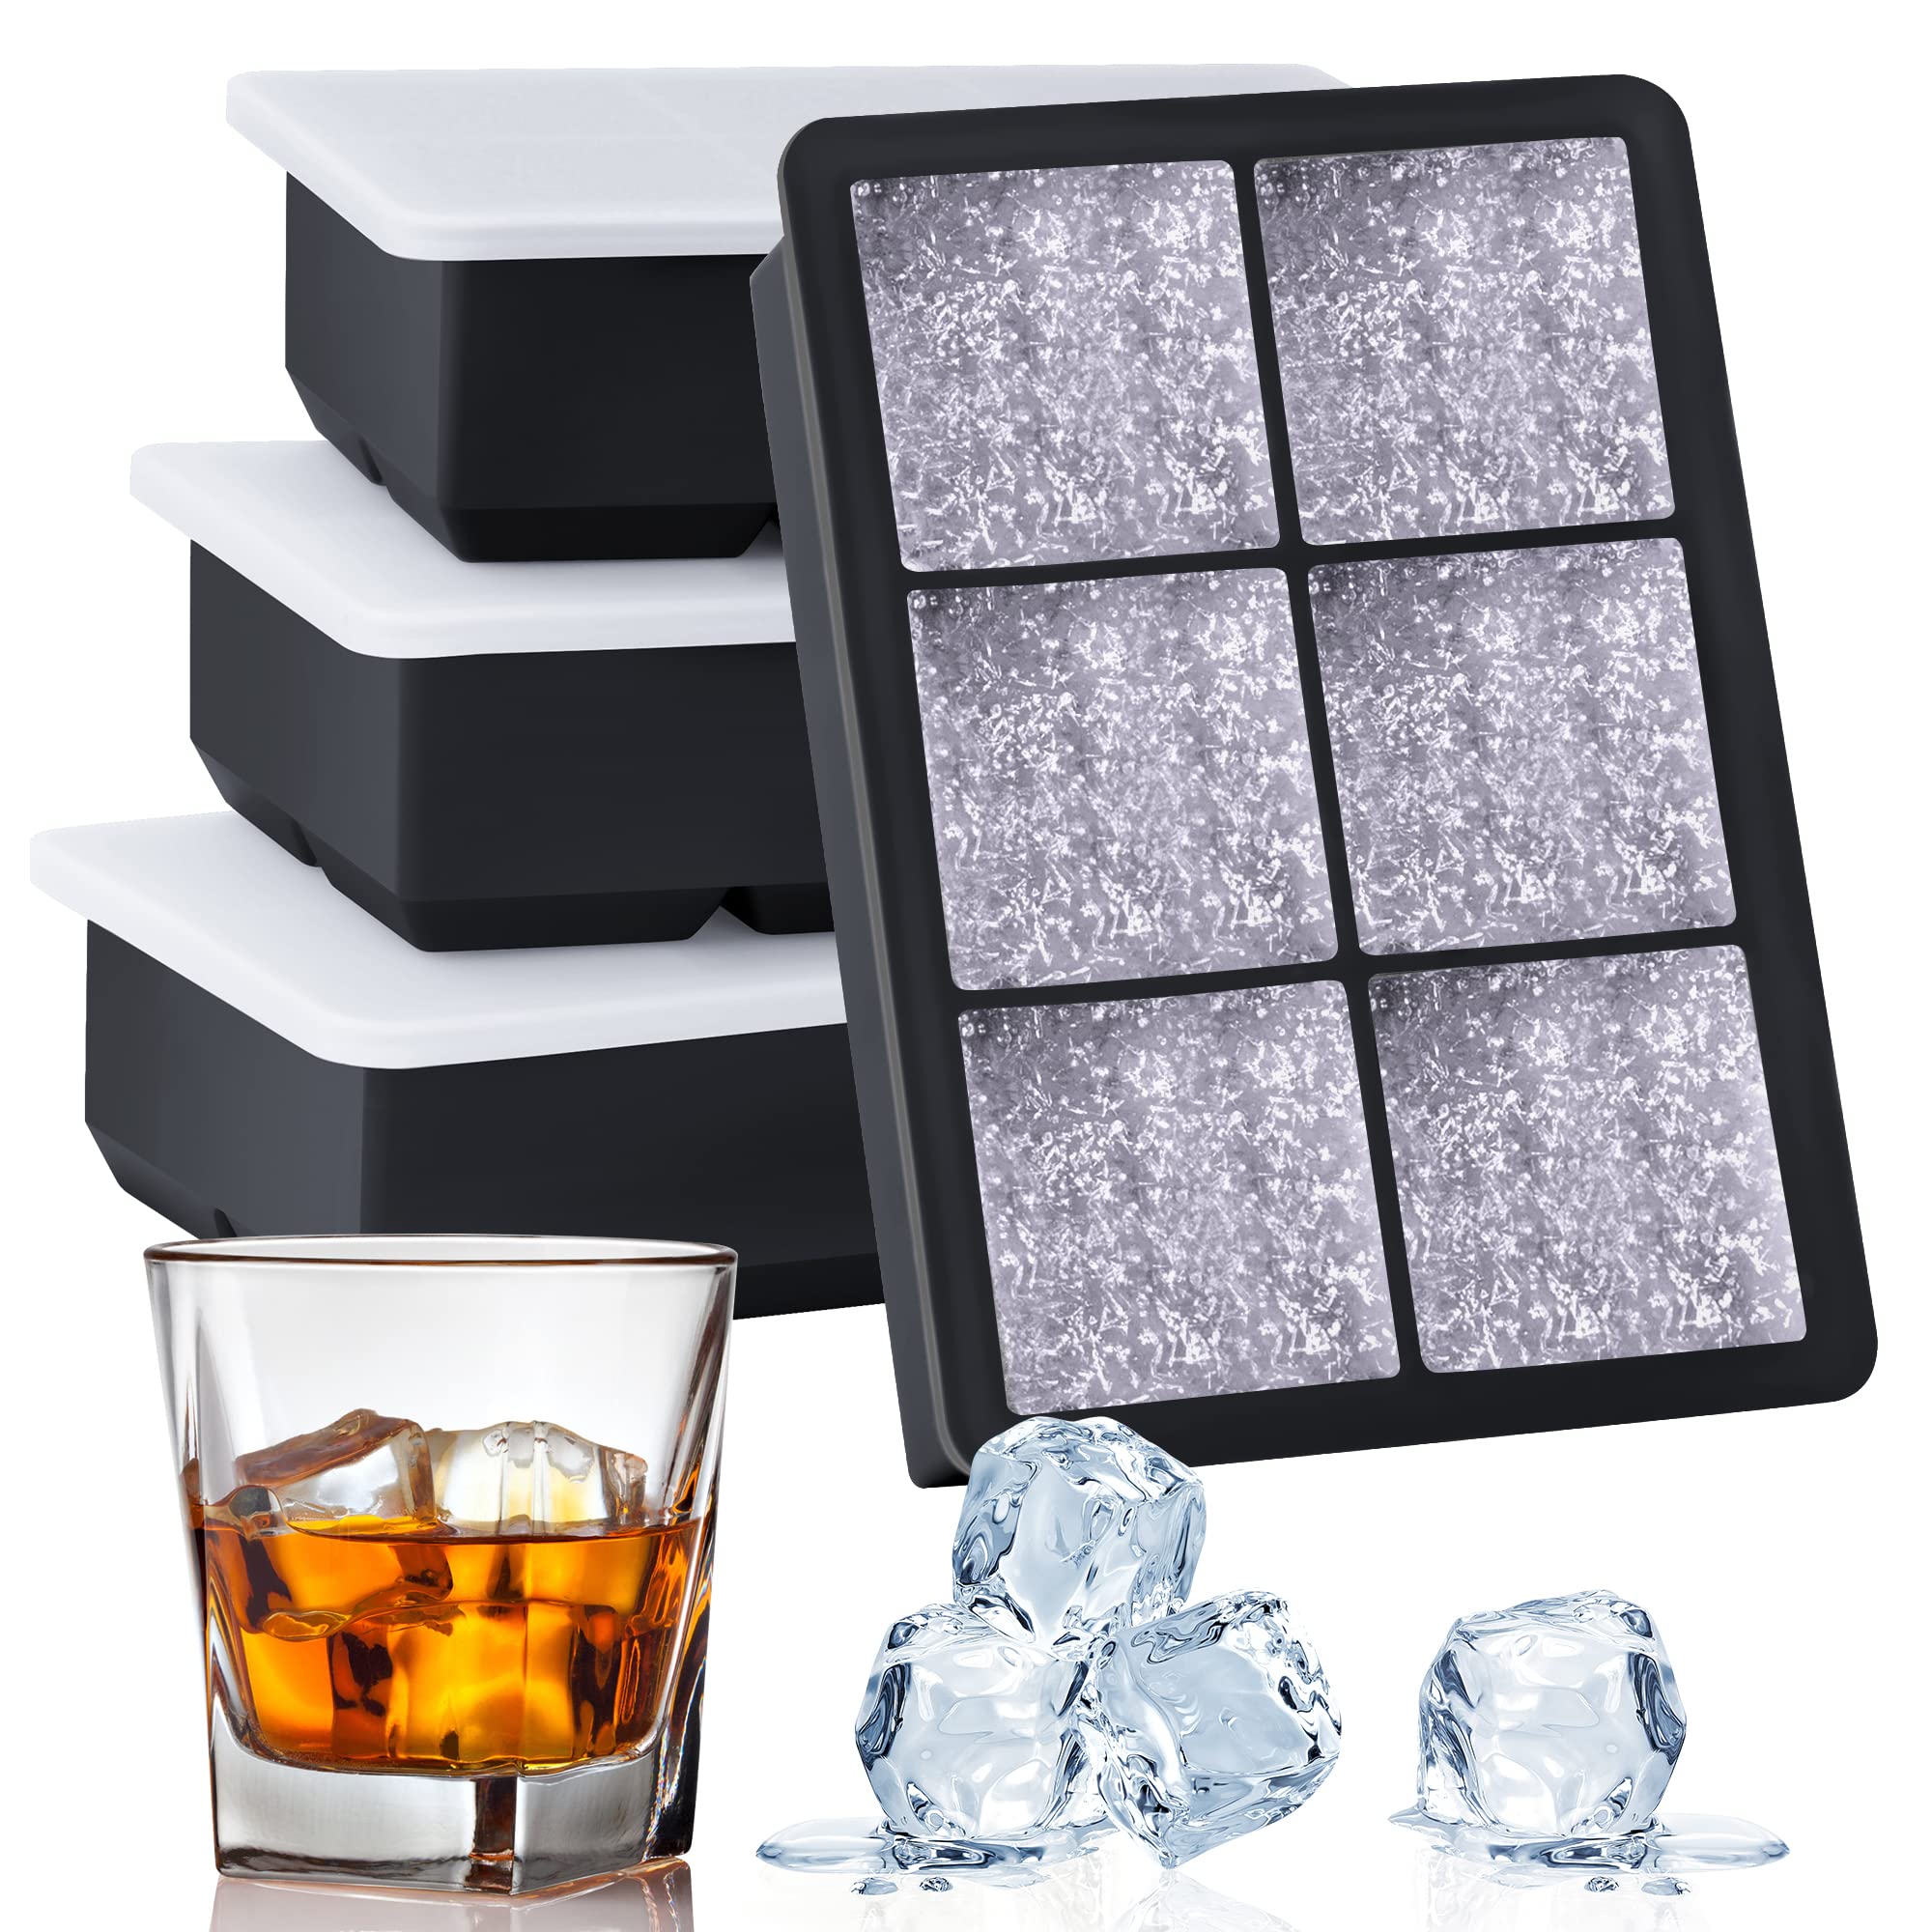 Kootek 4 Set Silicone Ice Cube Trays with Lids, BPA Free Large Square Molds - Easy Release Reusable Tray Flexible Mold for Chilling Whiskey Wine Cocktail Beverages Juice